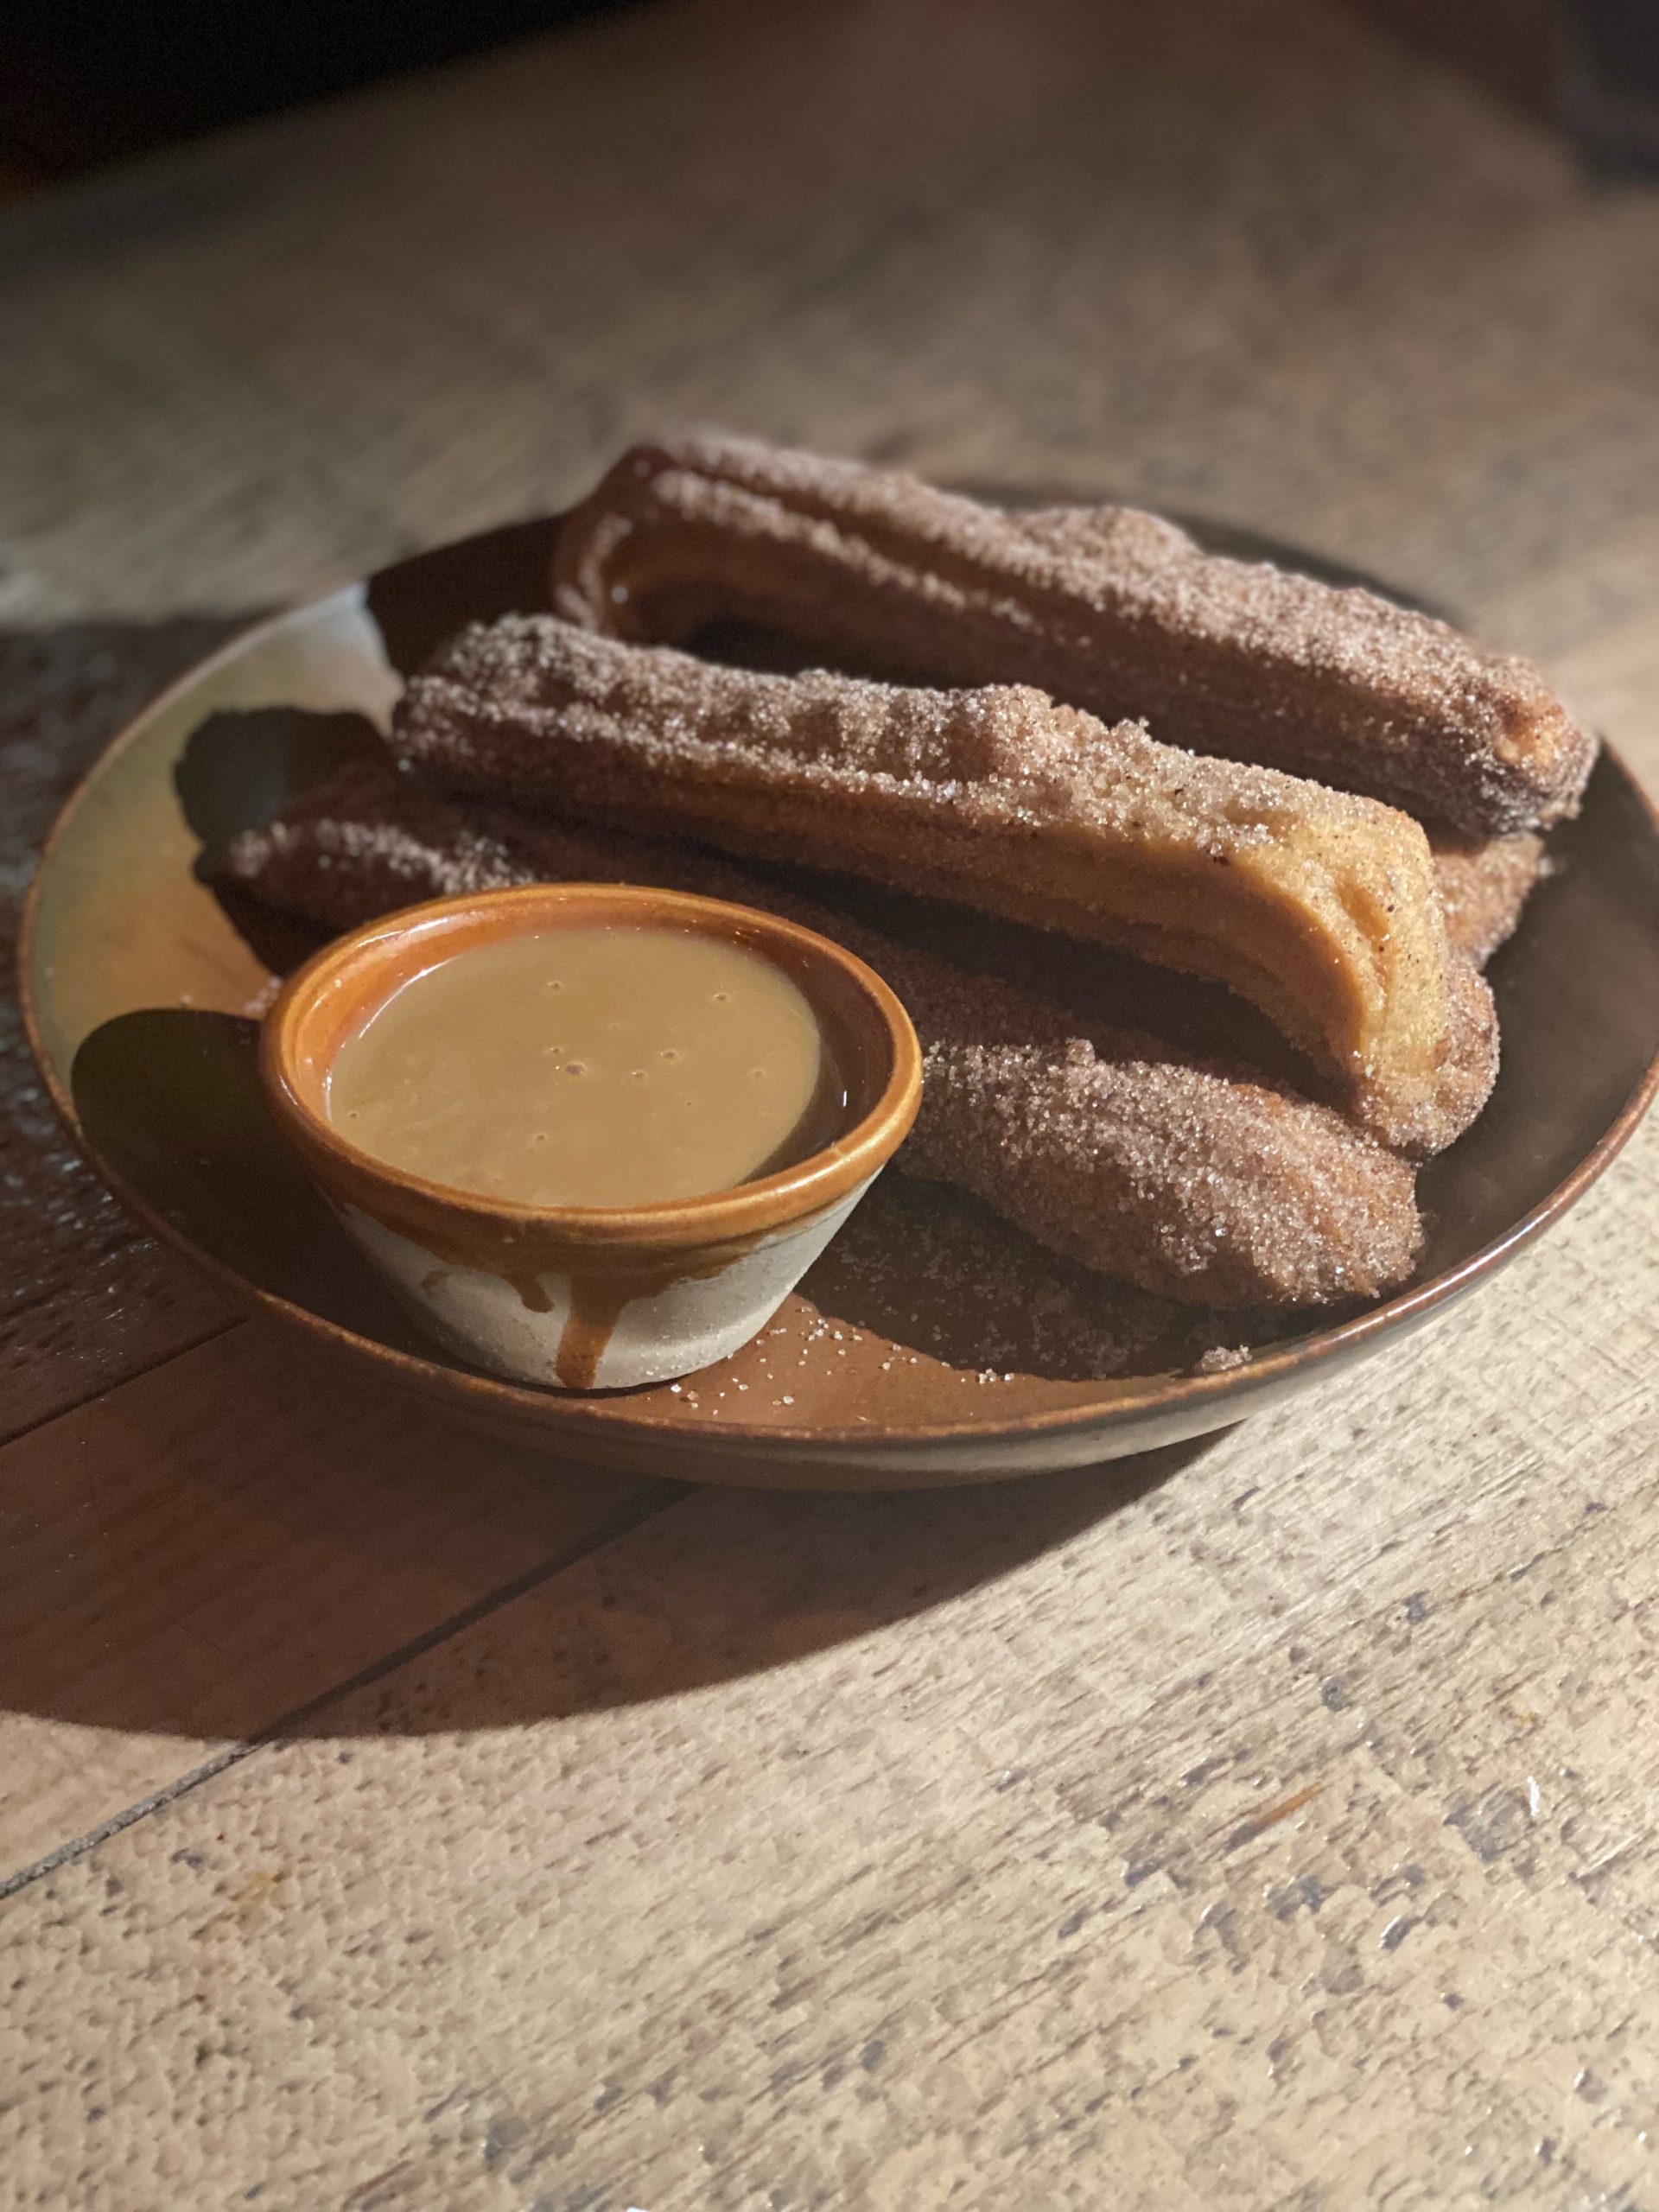 Gluten-free churros on a plate with a dipping sauce.